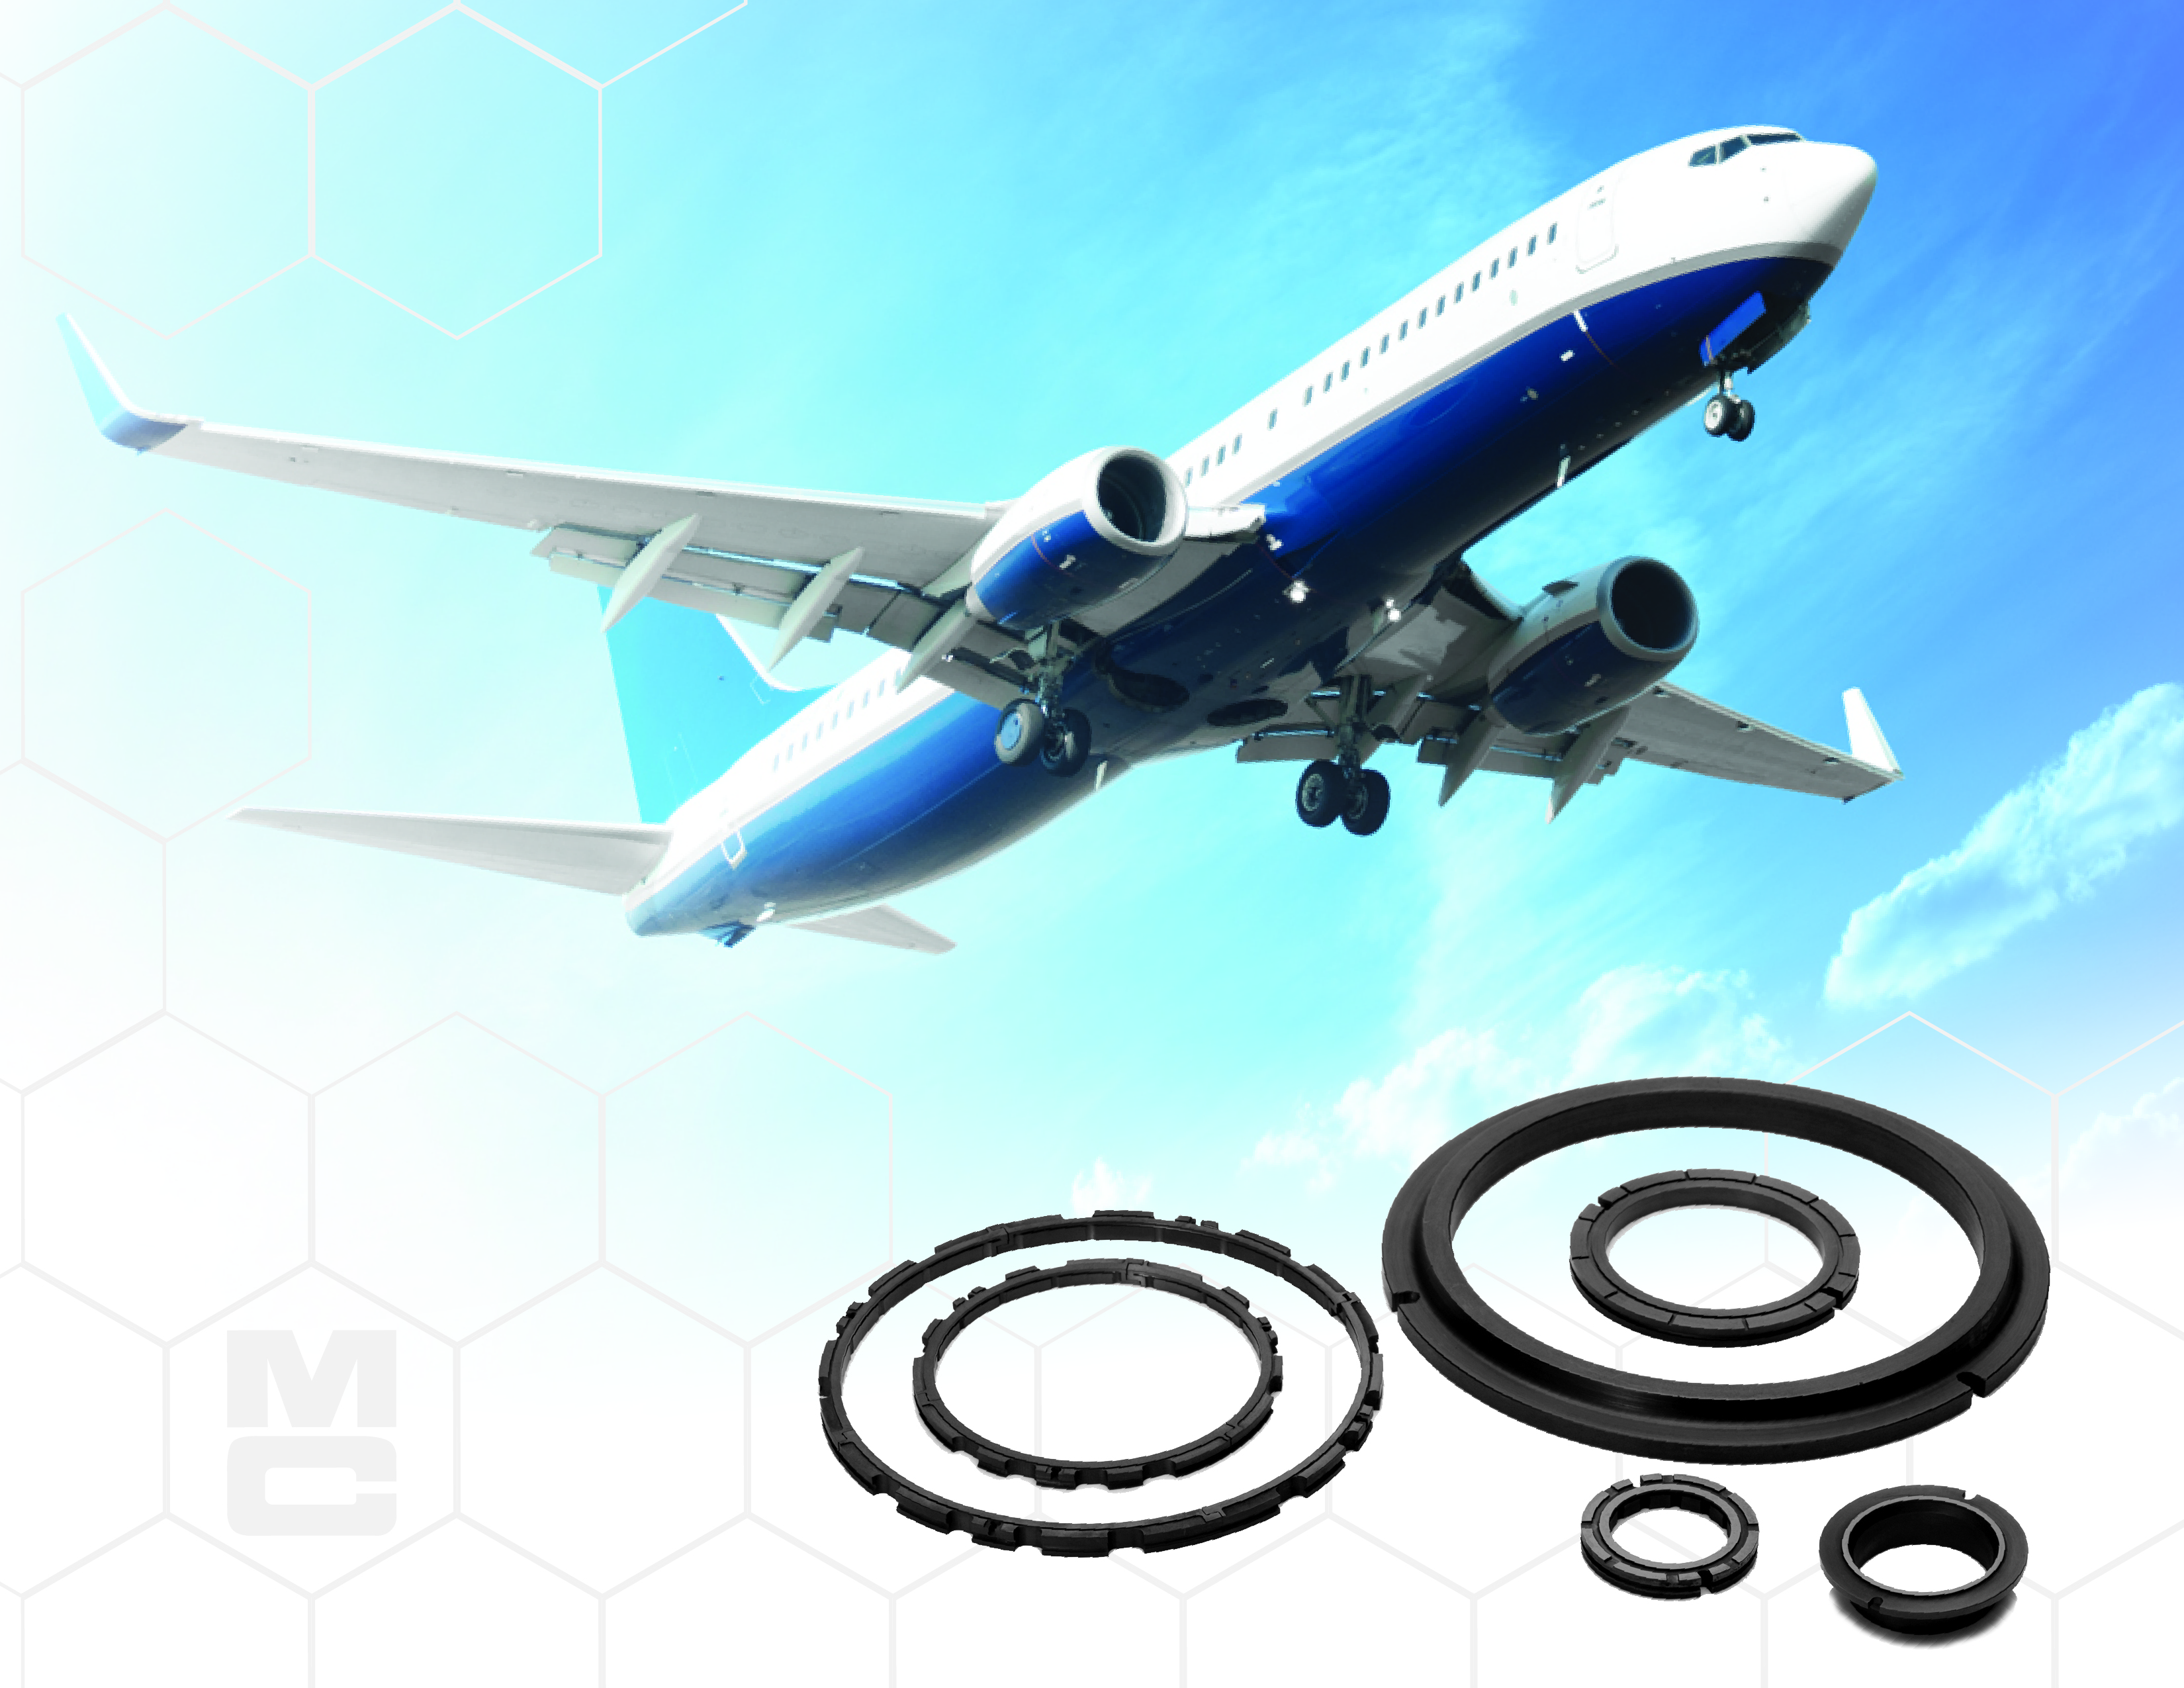 Metallized Carbon Corporation (Metcar) says that its products are suitable for aerospace gearbox applications.